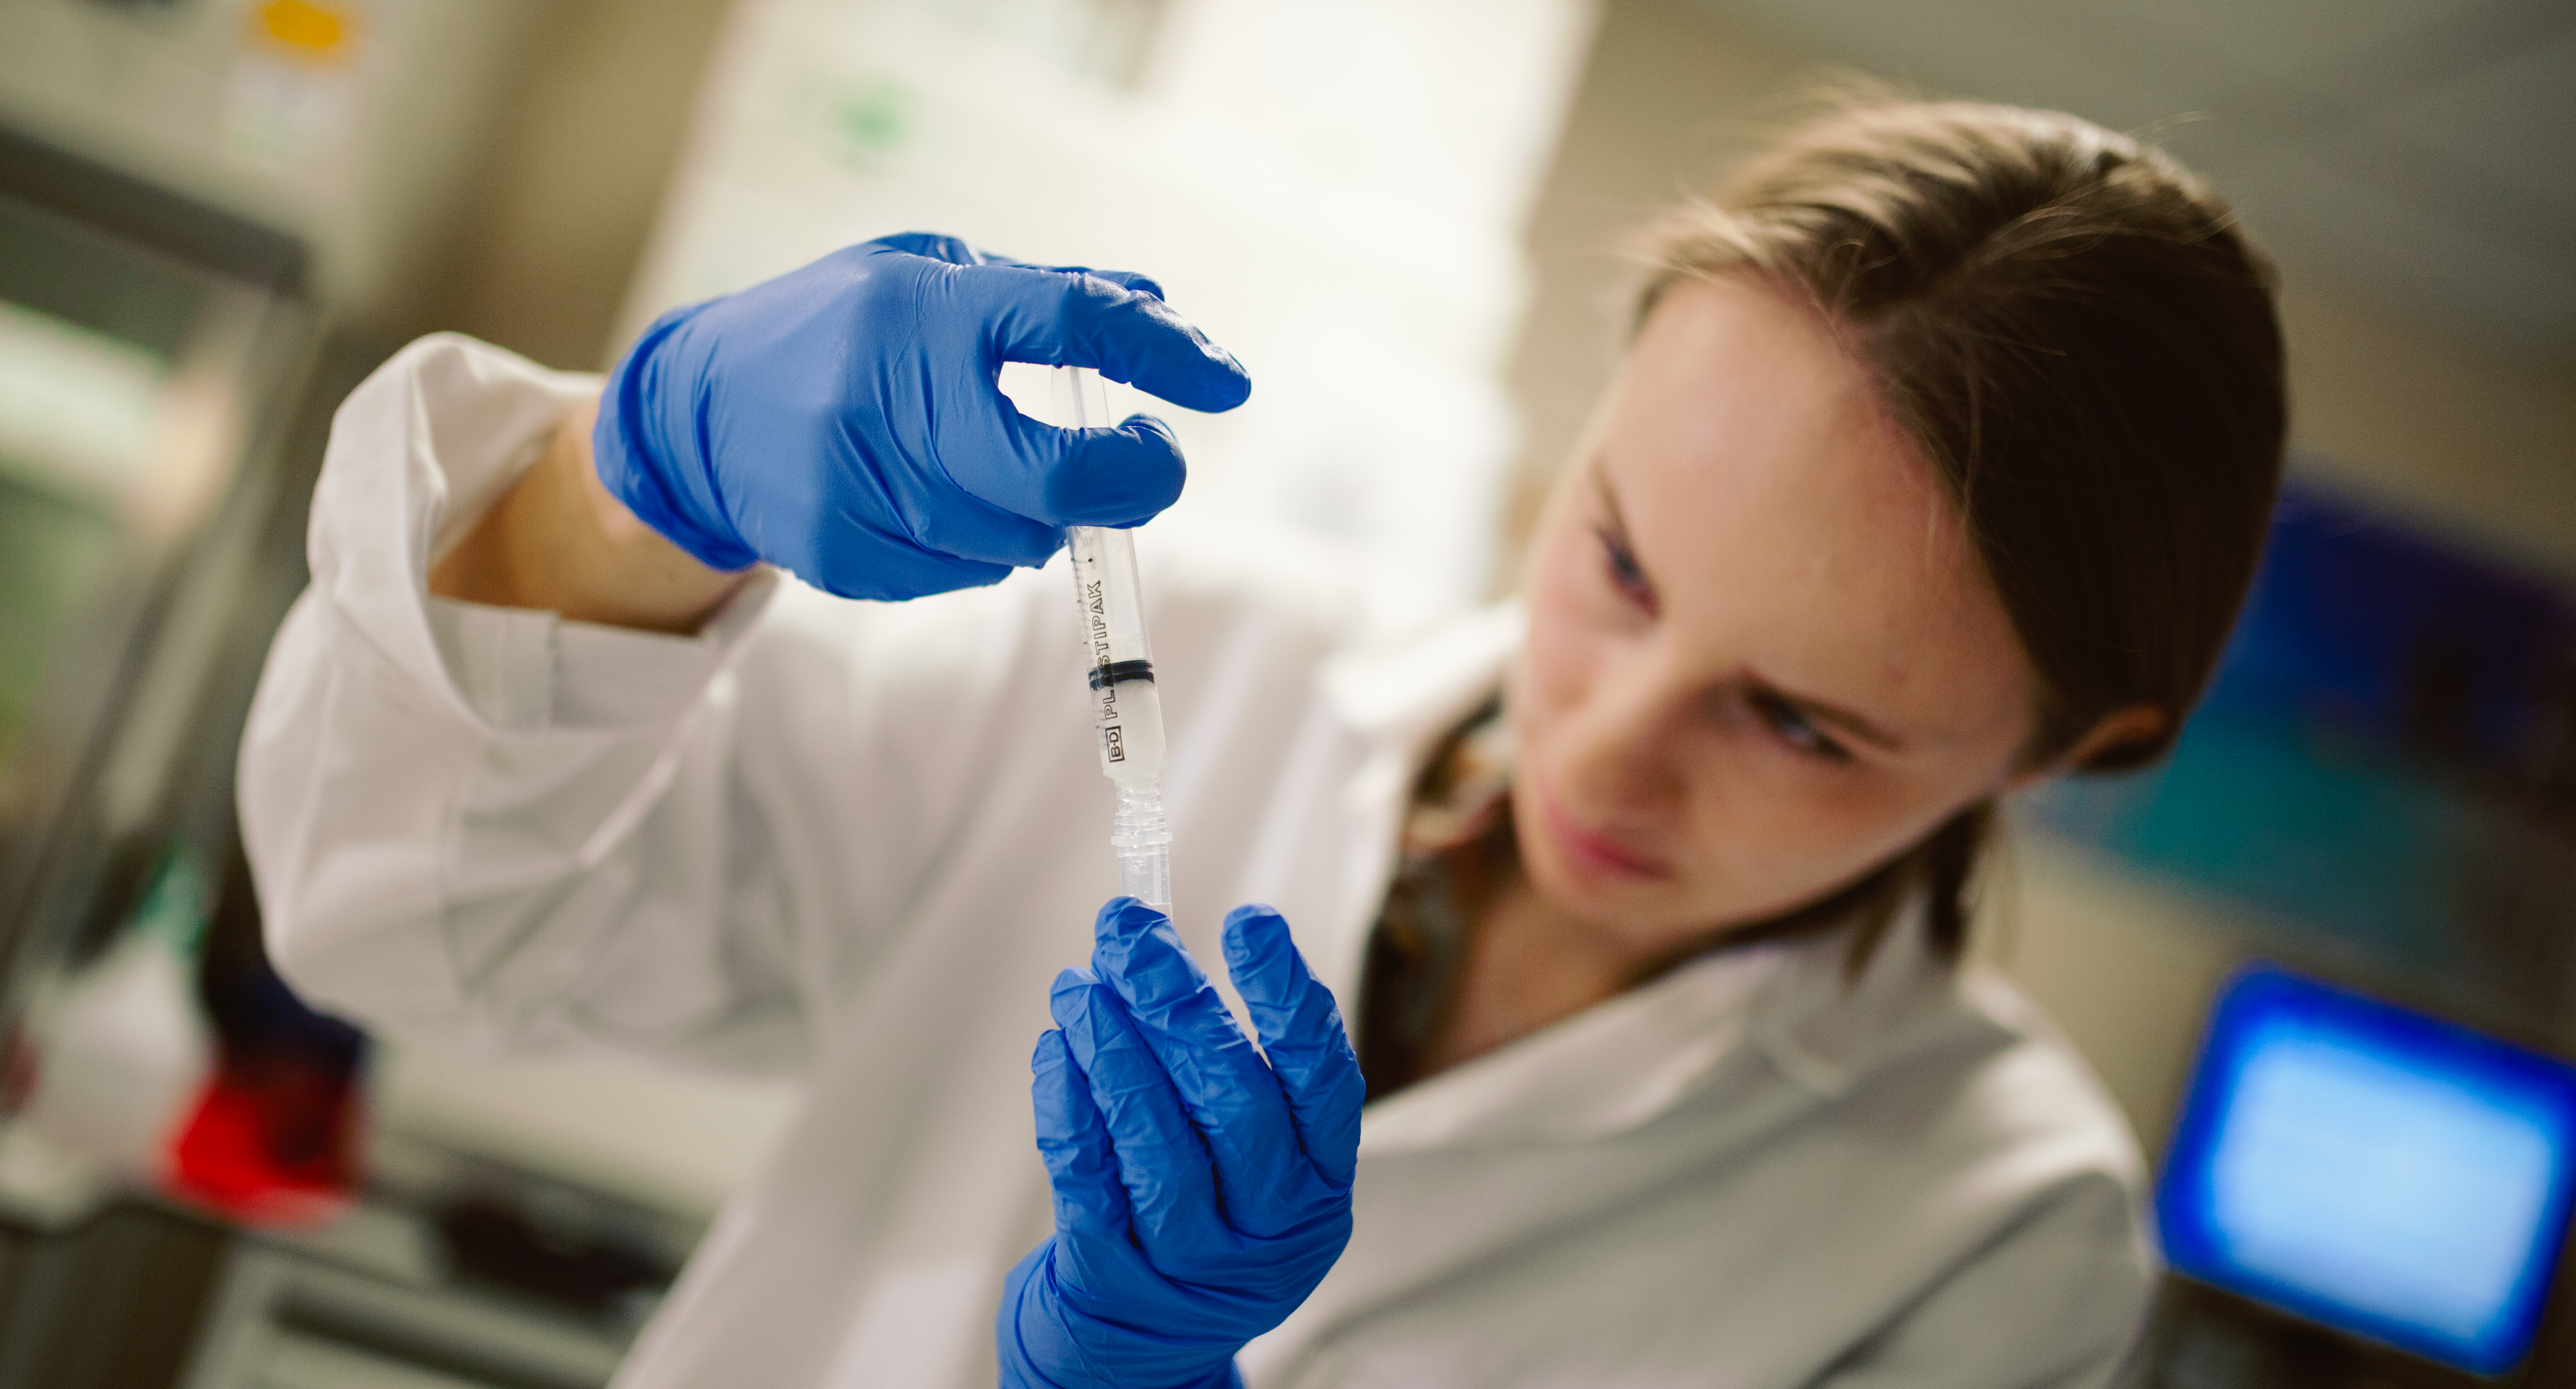 A clinical research nurse looking at a vial of liquid